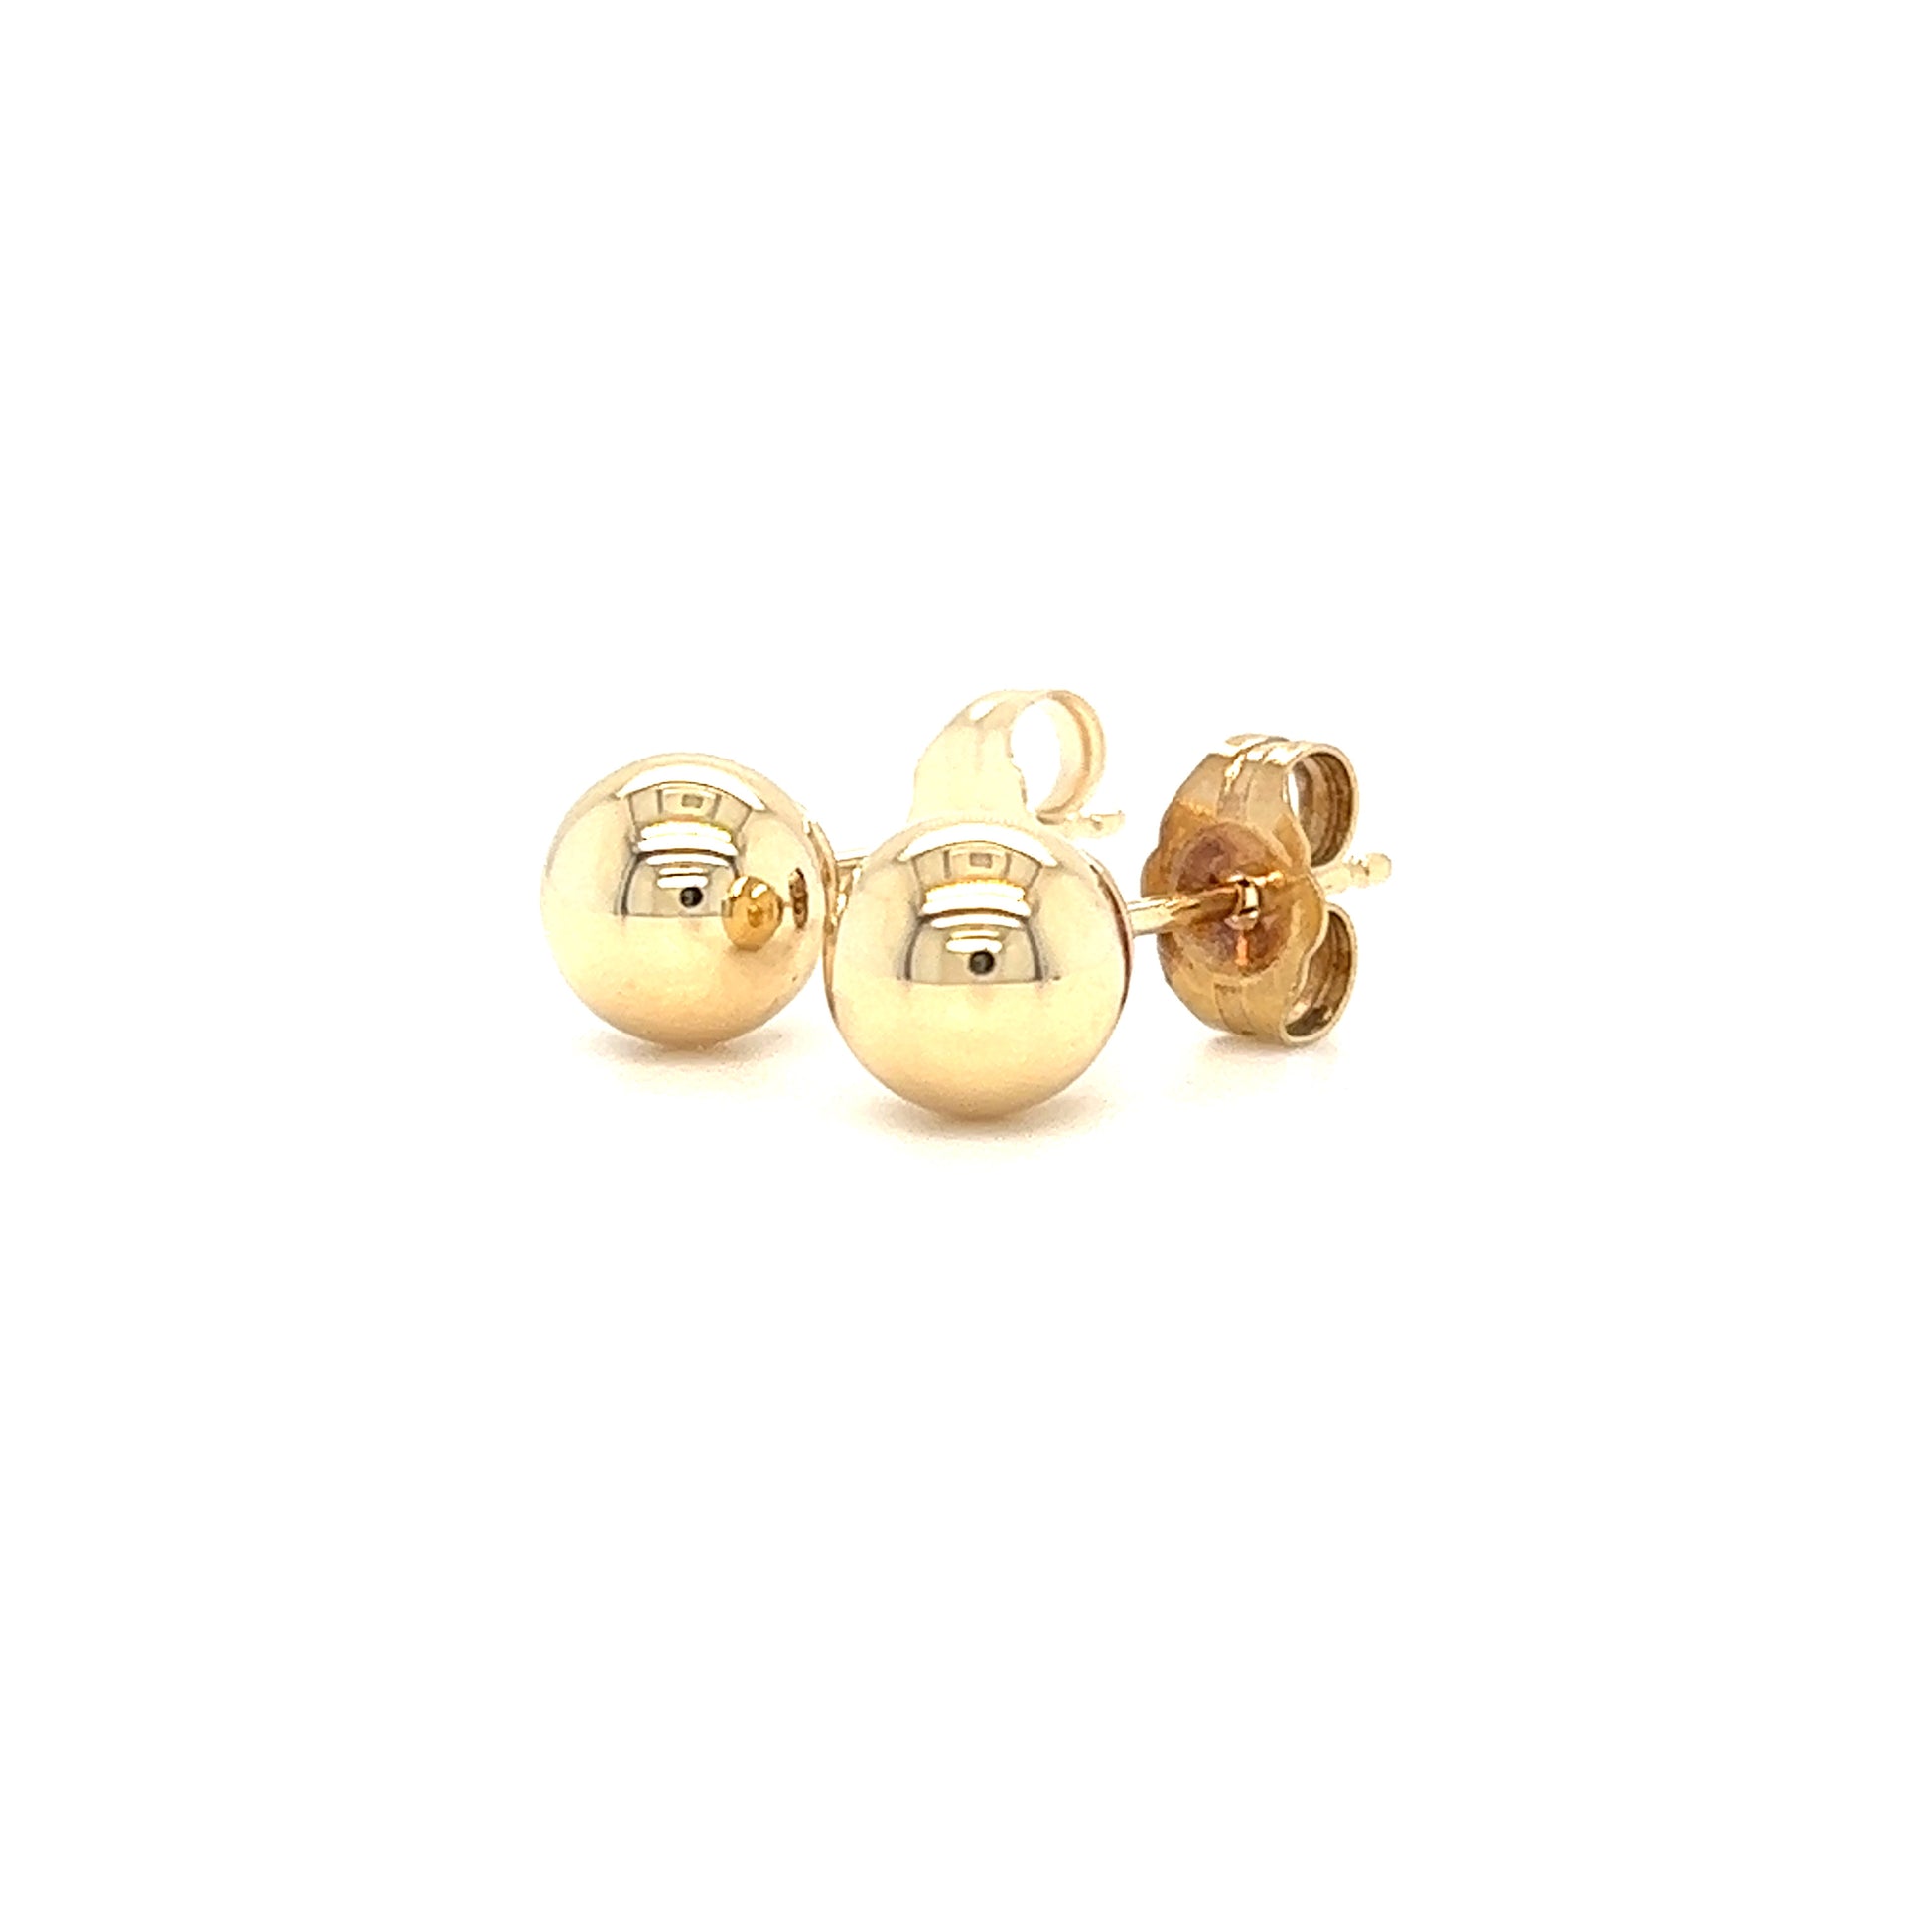 Ball 6mm Stud Earrings in 14K Yellow Gold Right Side View